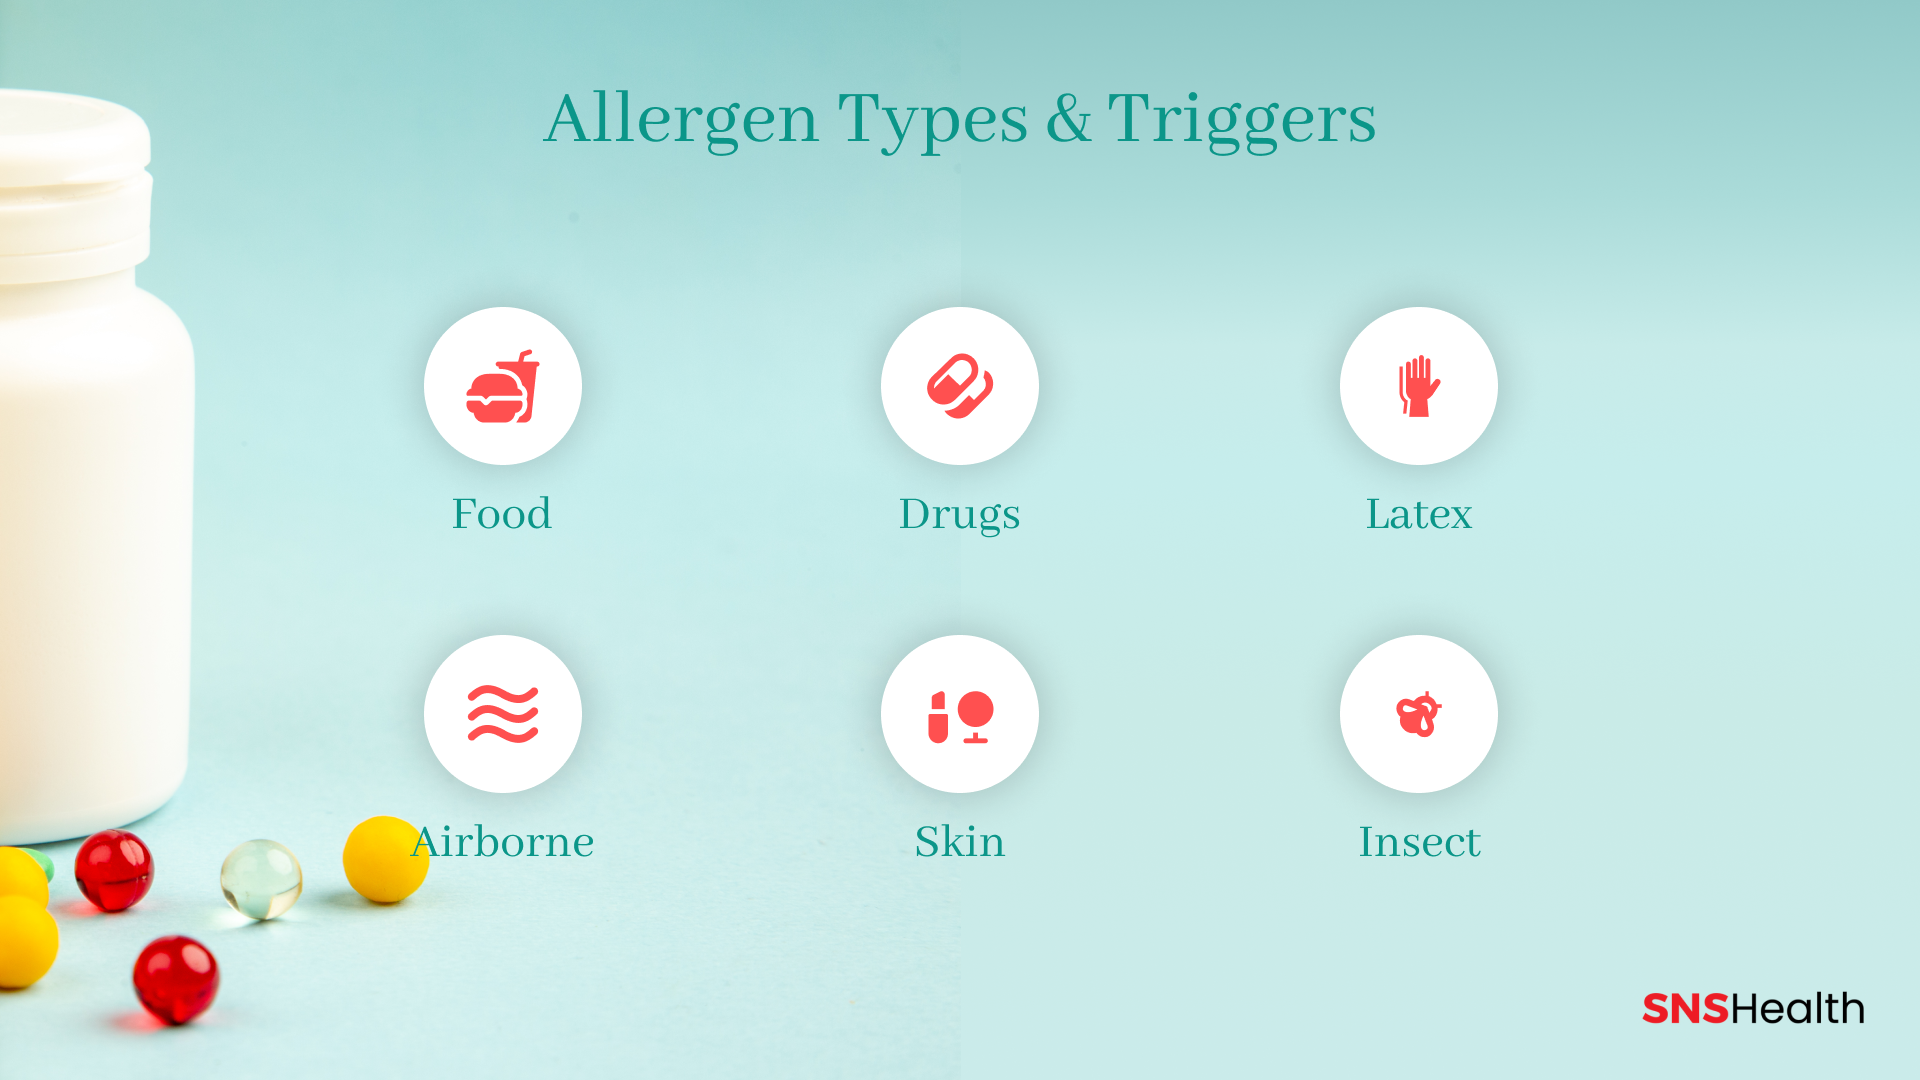 Allergen Types and Triggers